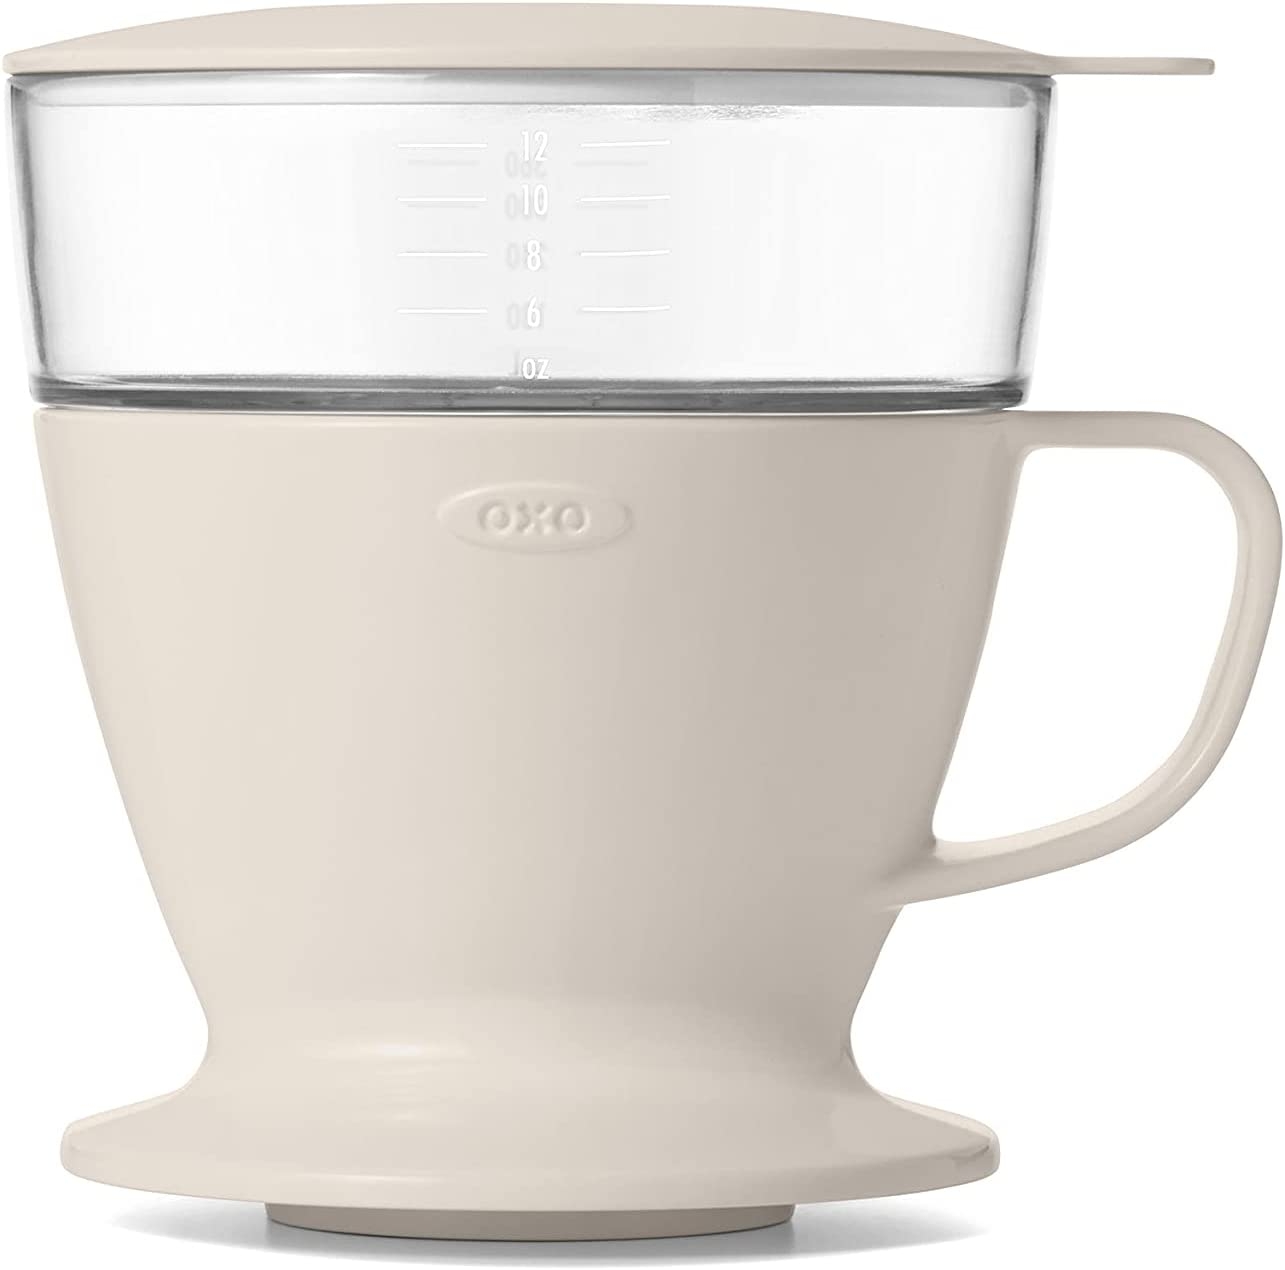 OXO Brew Single Serve Pour-Over Coffee Maker Import To Shop ×Product customization General Description Gallery Reviews